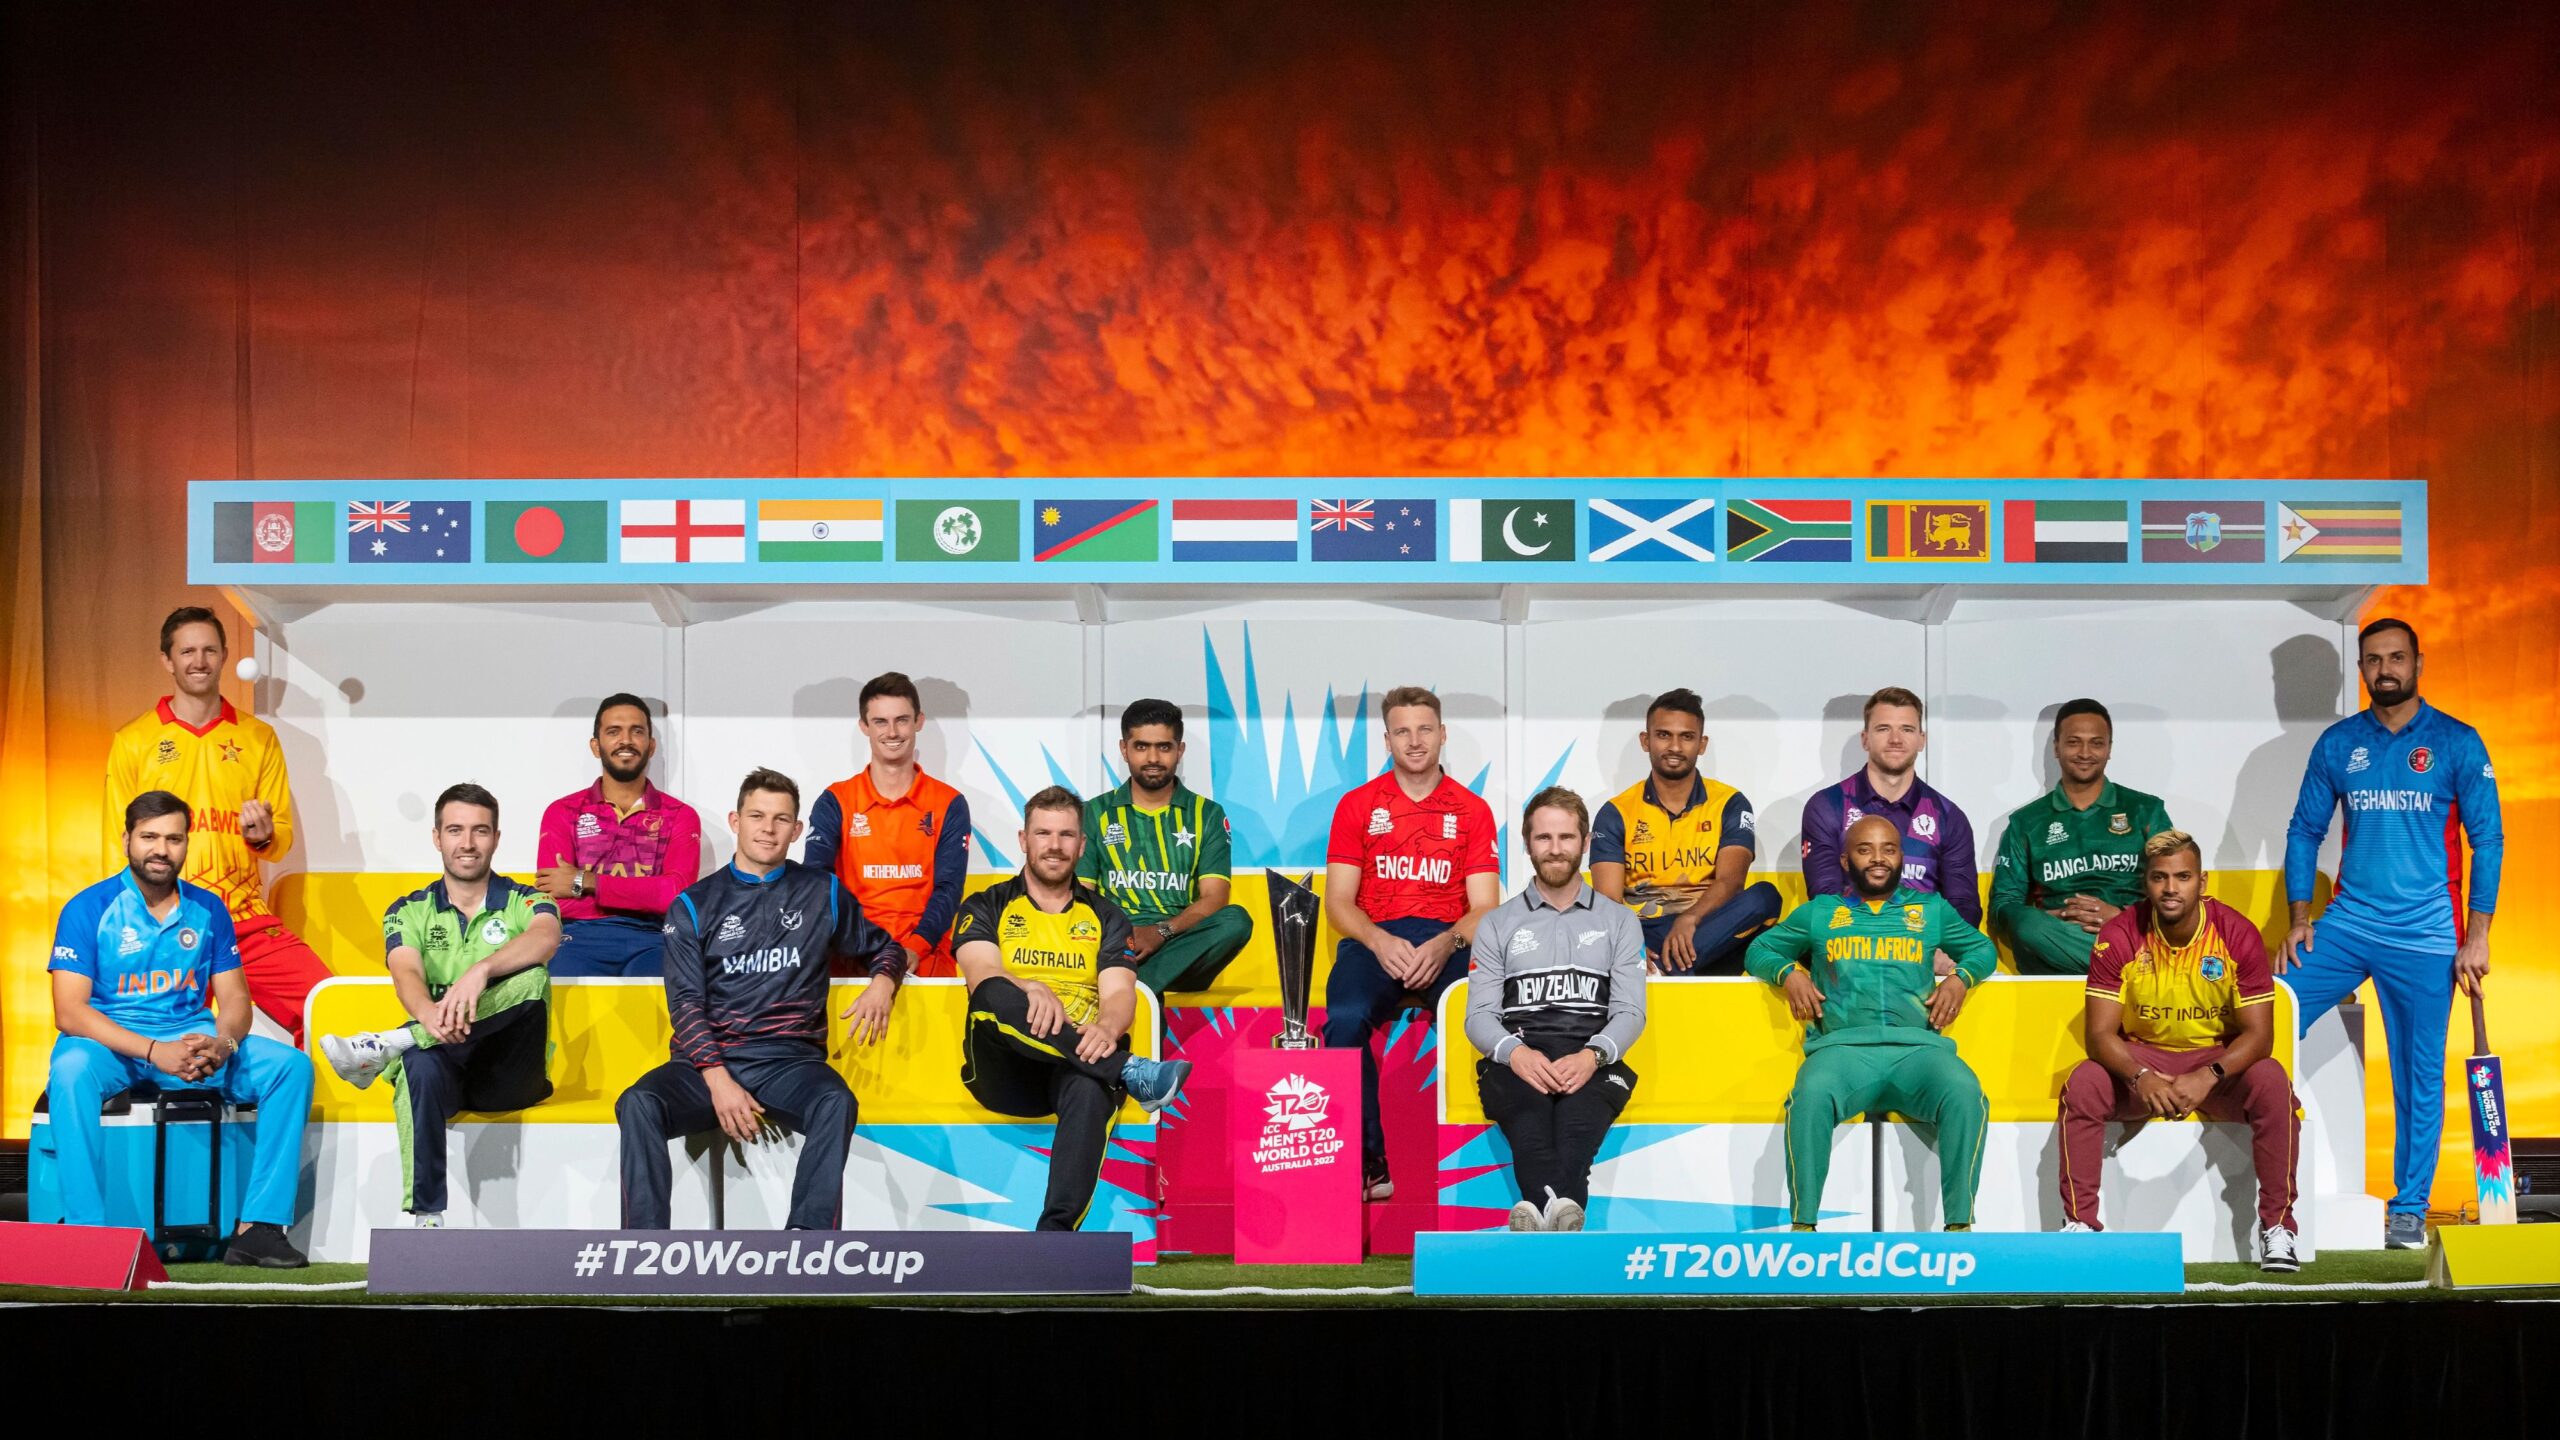 T20 World Cup 2022 – The countdown is on